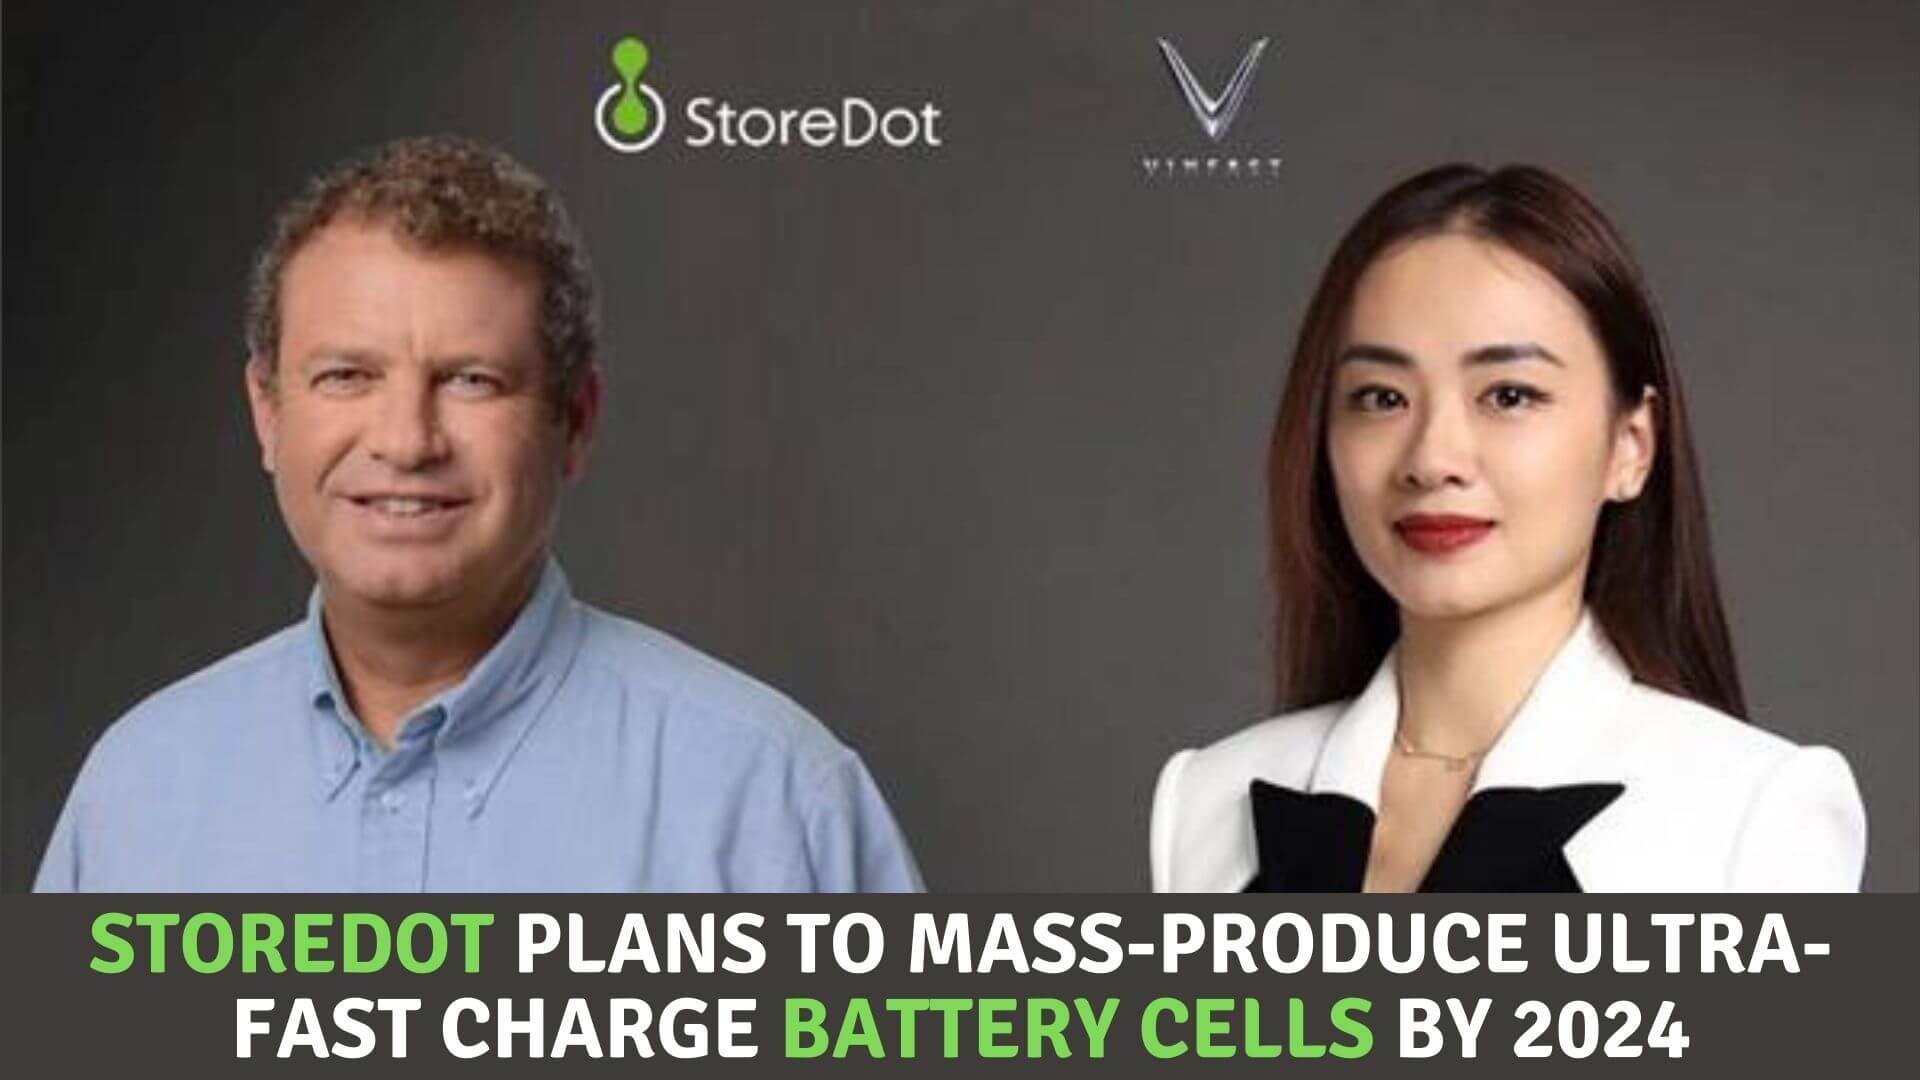 https://e-vehicleinfo.com/storedot-to-produce-ultra-fast-charge-battery-cells-by-2024/